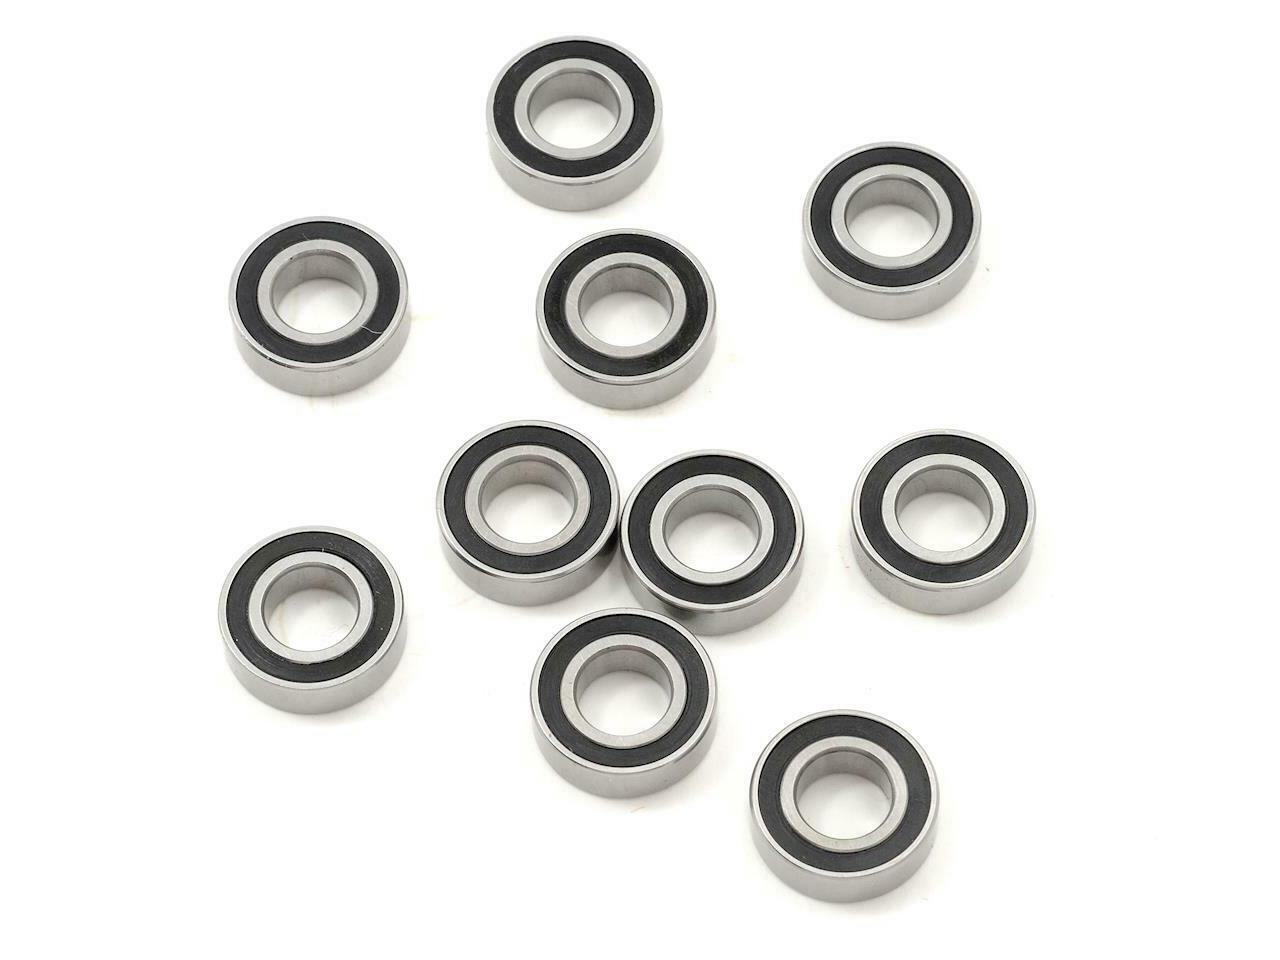 PTK-10043 8X16X5mm RUBBERL SEALED 